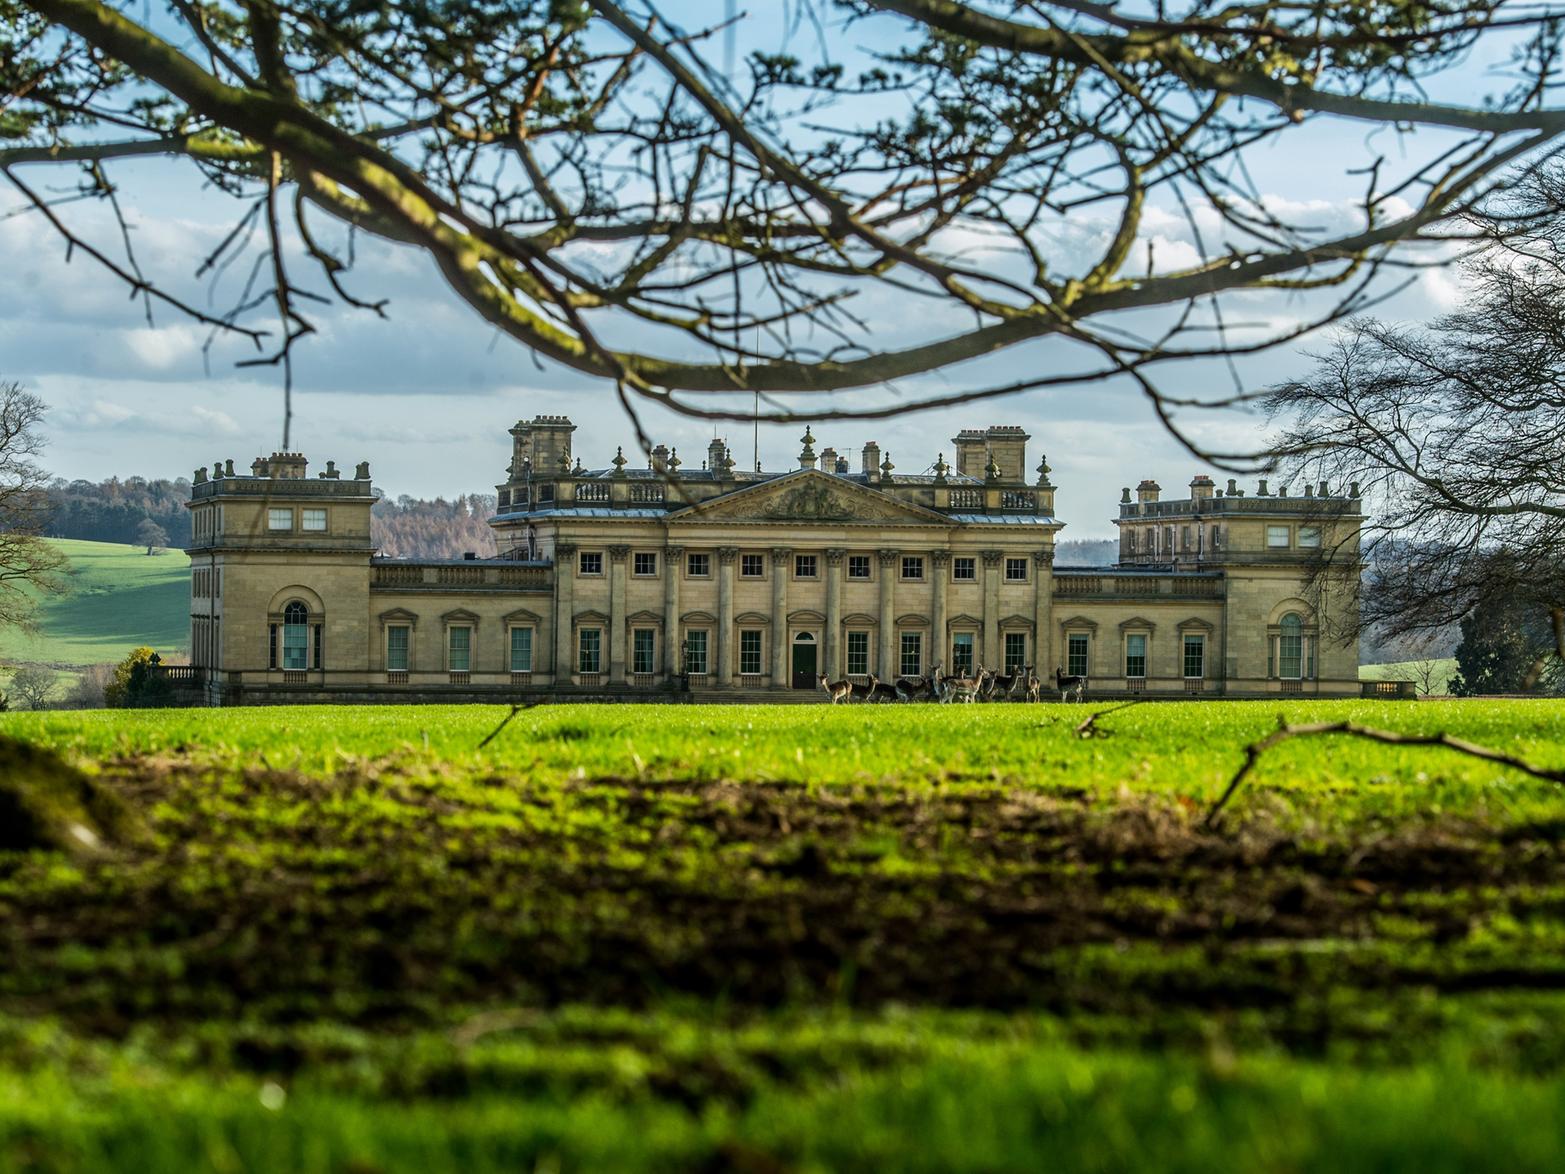 The Harewood area had an average download speed of just 14mpbs, too slow for 4K UHD streaming